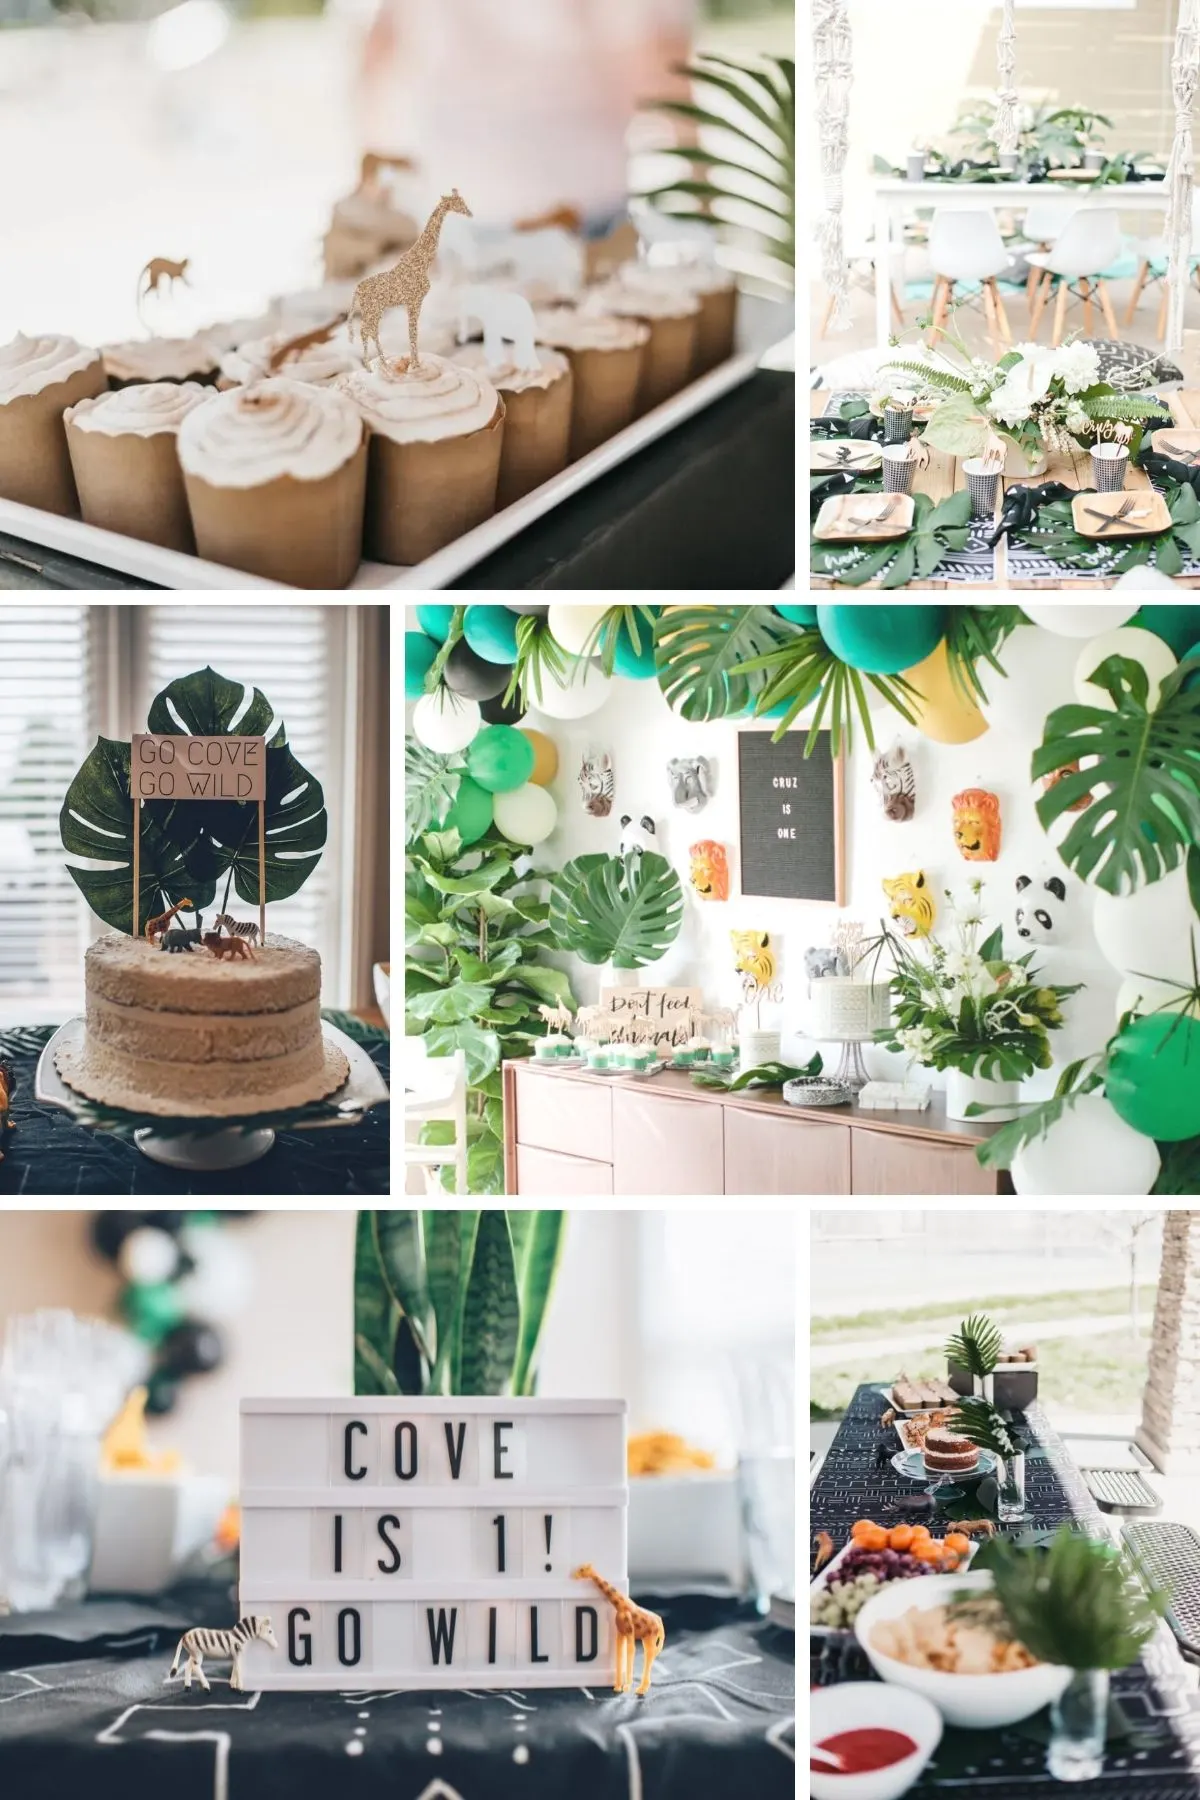 Photo collage from safari/jungle party theme including cupcakes, cake, and party sign.